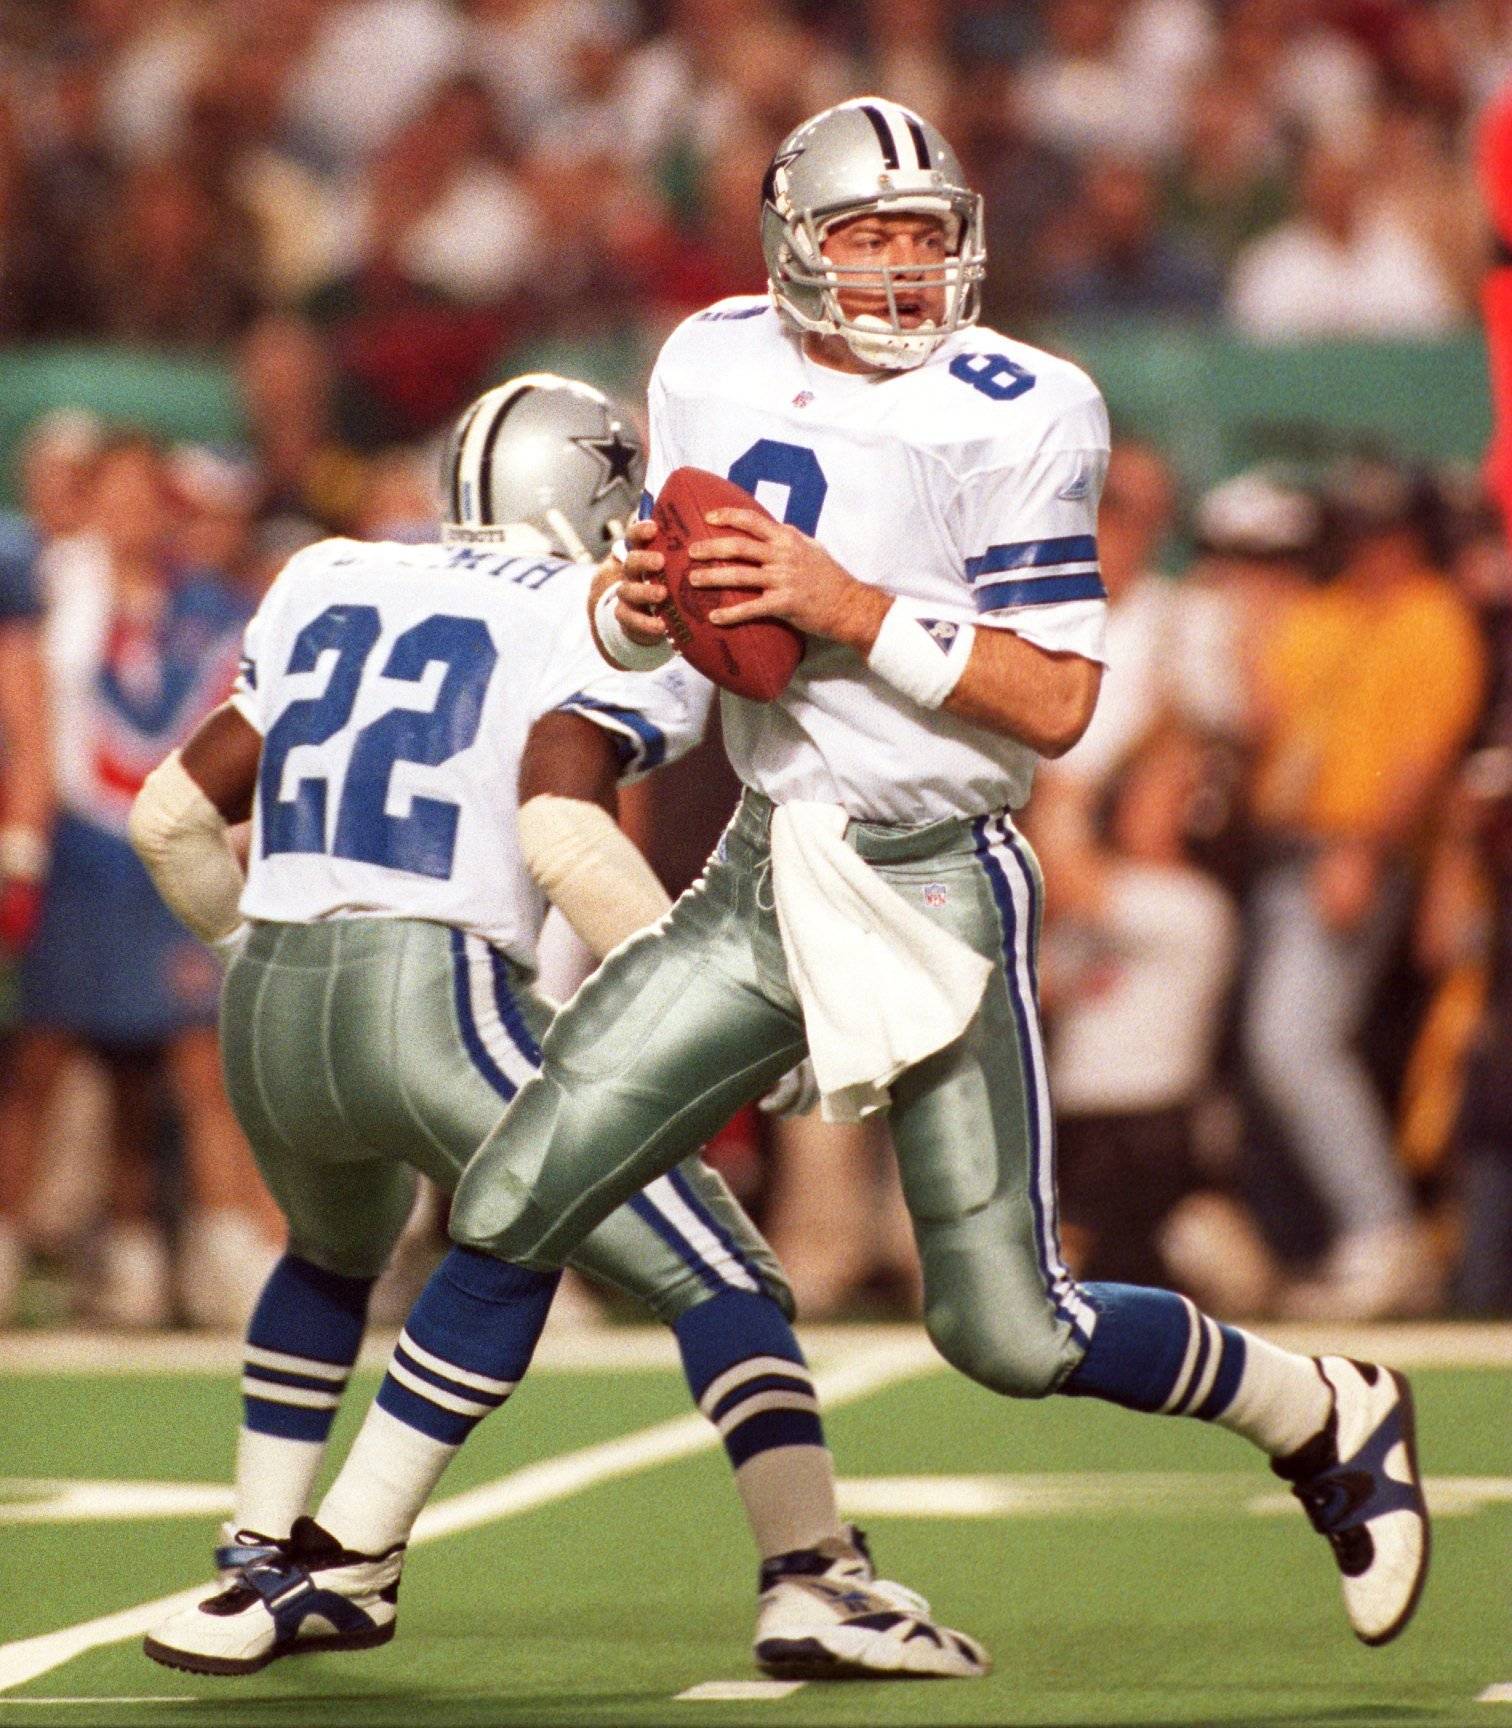 Happy Birthday to Troy Aikman, who turns 48 today! 